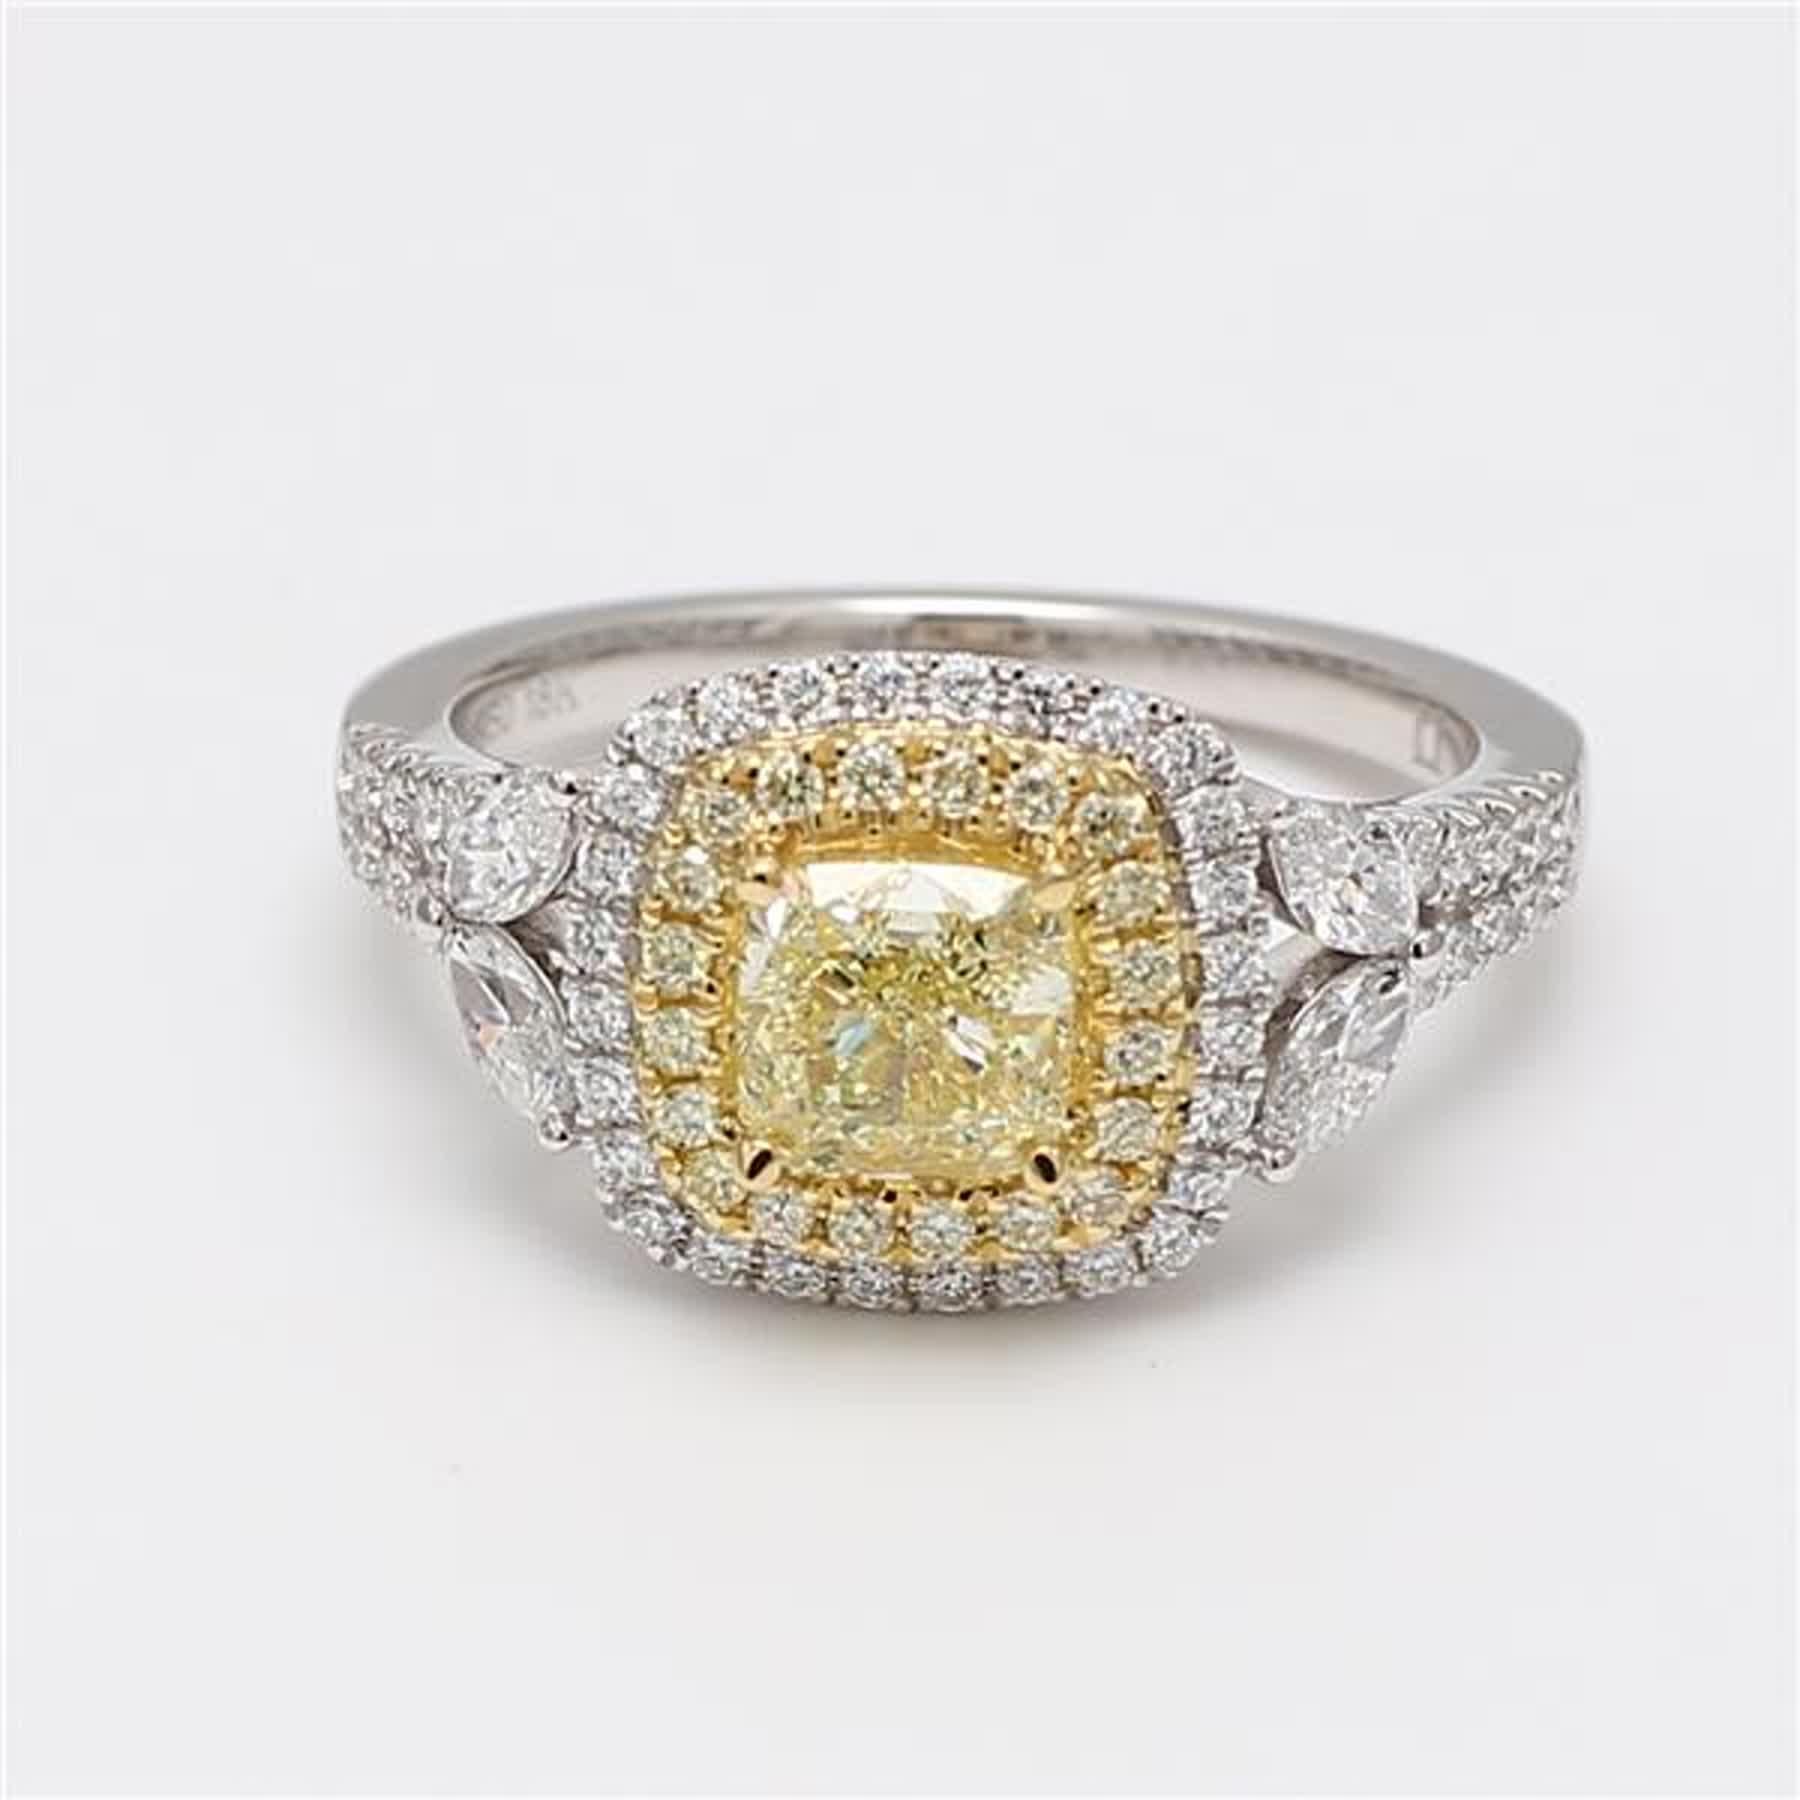 GIA certified rare square cushion natural yellow diamond surrounded with natural round white diamonds and round yellow diamonds. This ring is designed to be in a simple setting. Can be used as an engagement ring or in addition to your collection of